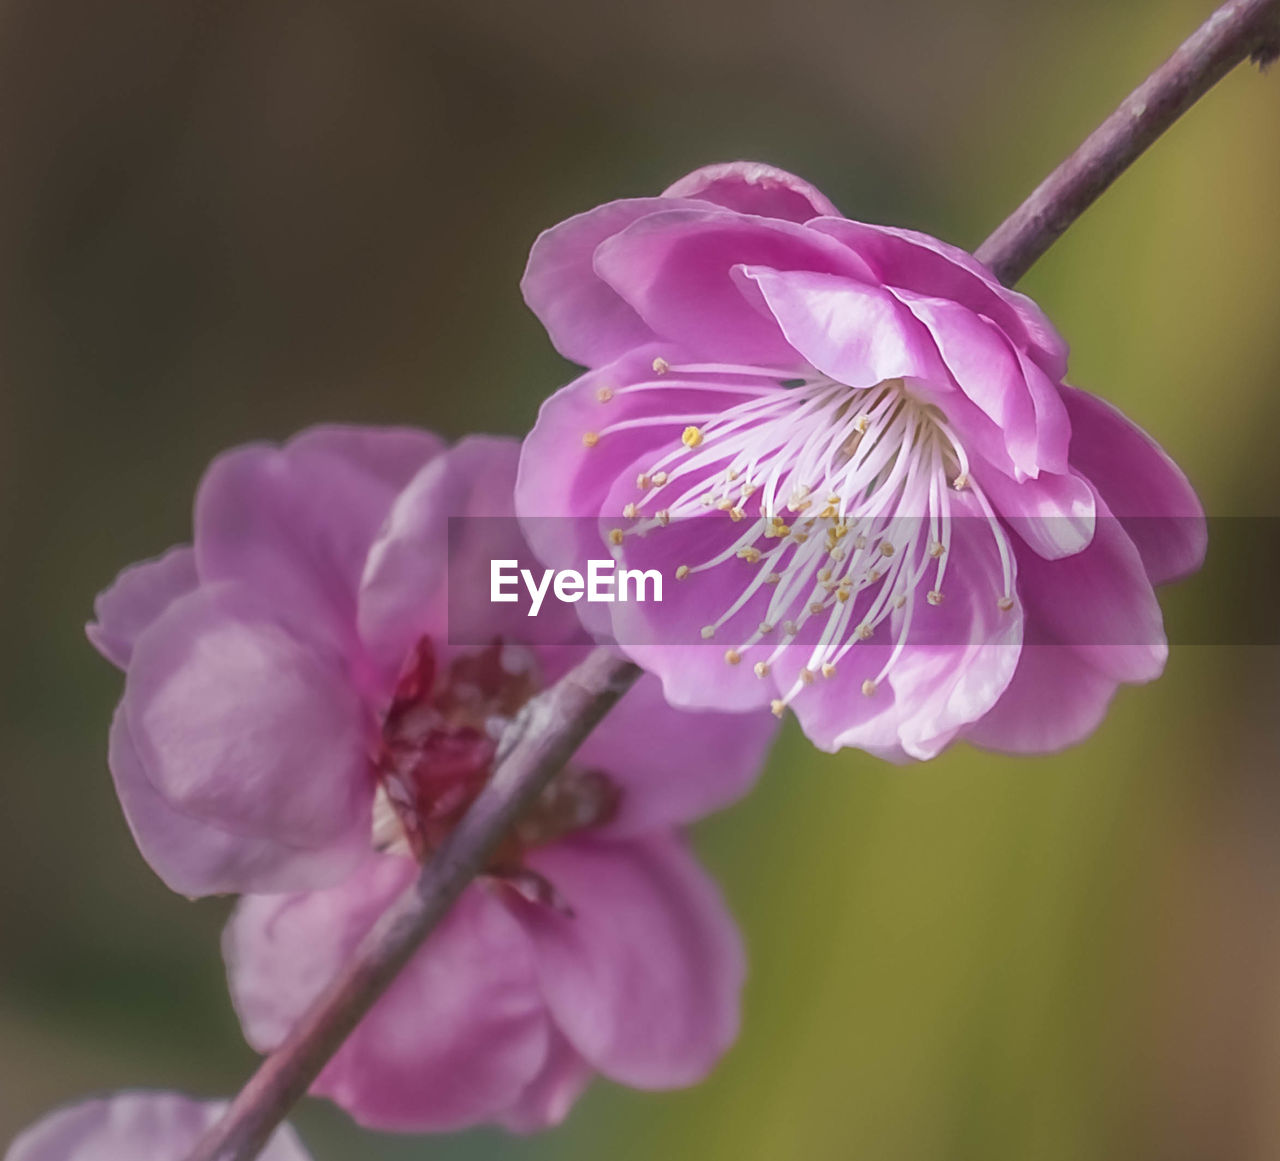 flower, plant, flowering plant, freshness, beauty in nature, blossom, fragility, pink, close-up, petal, flower head, nature, inflorescence, macro photography, growth, springtime, focus on foreground, no people, purple, plant stem, outdoors, tree, selective focus, pollen, botany, branch, stamen, wildflower